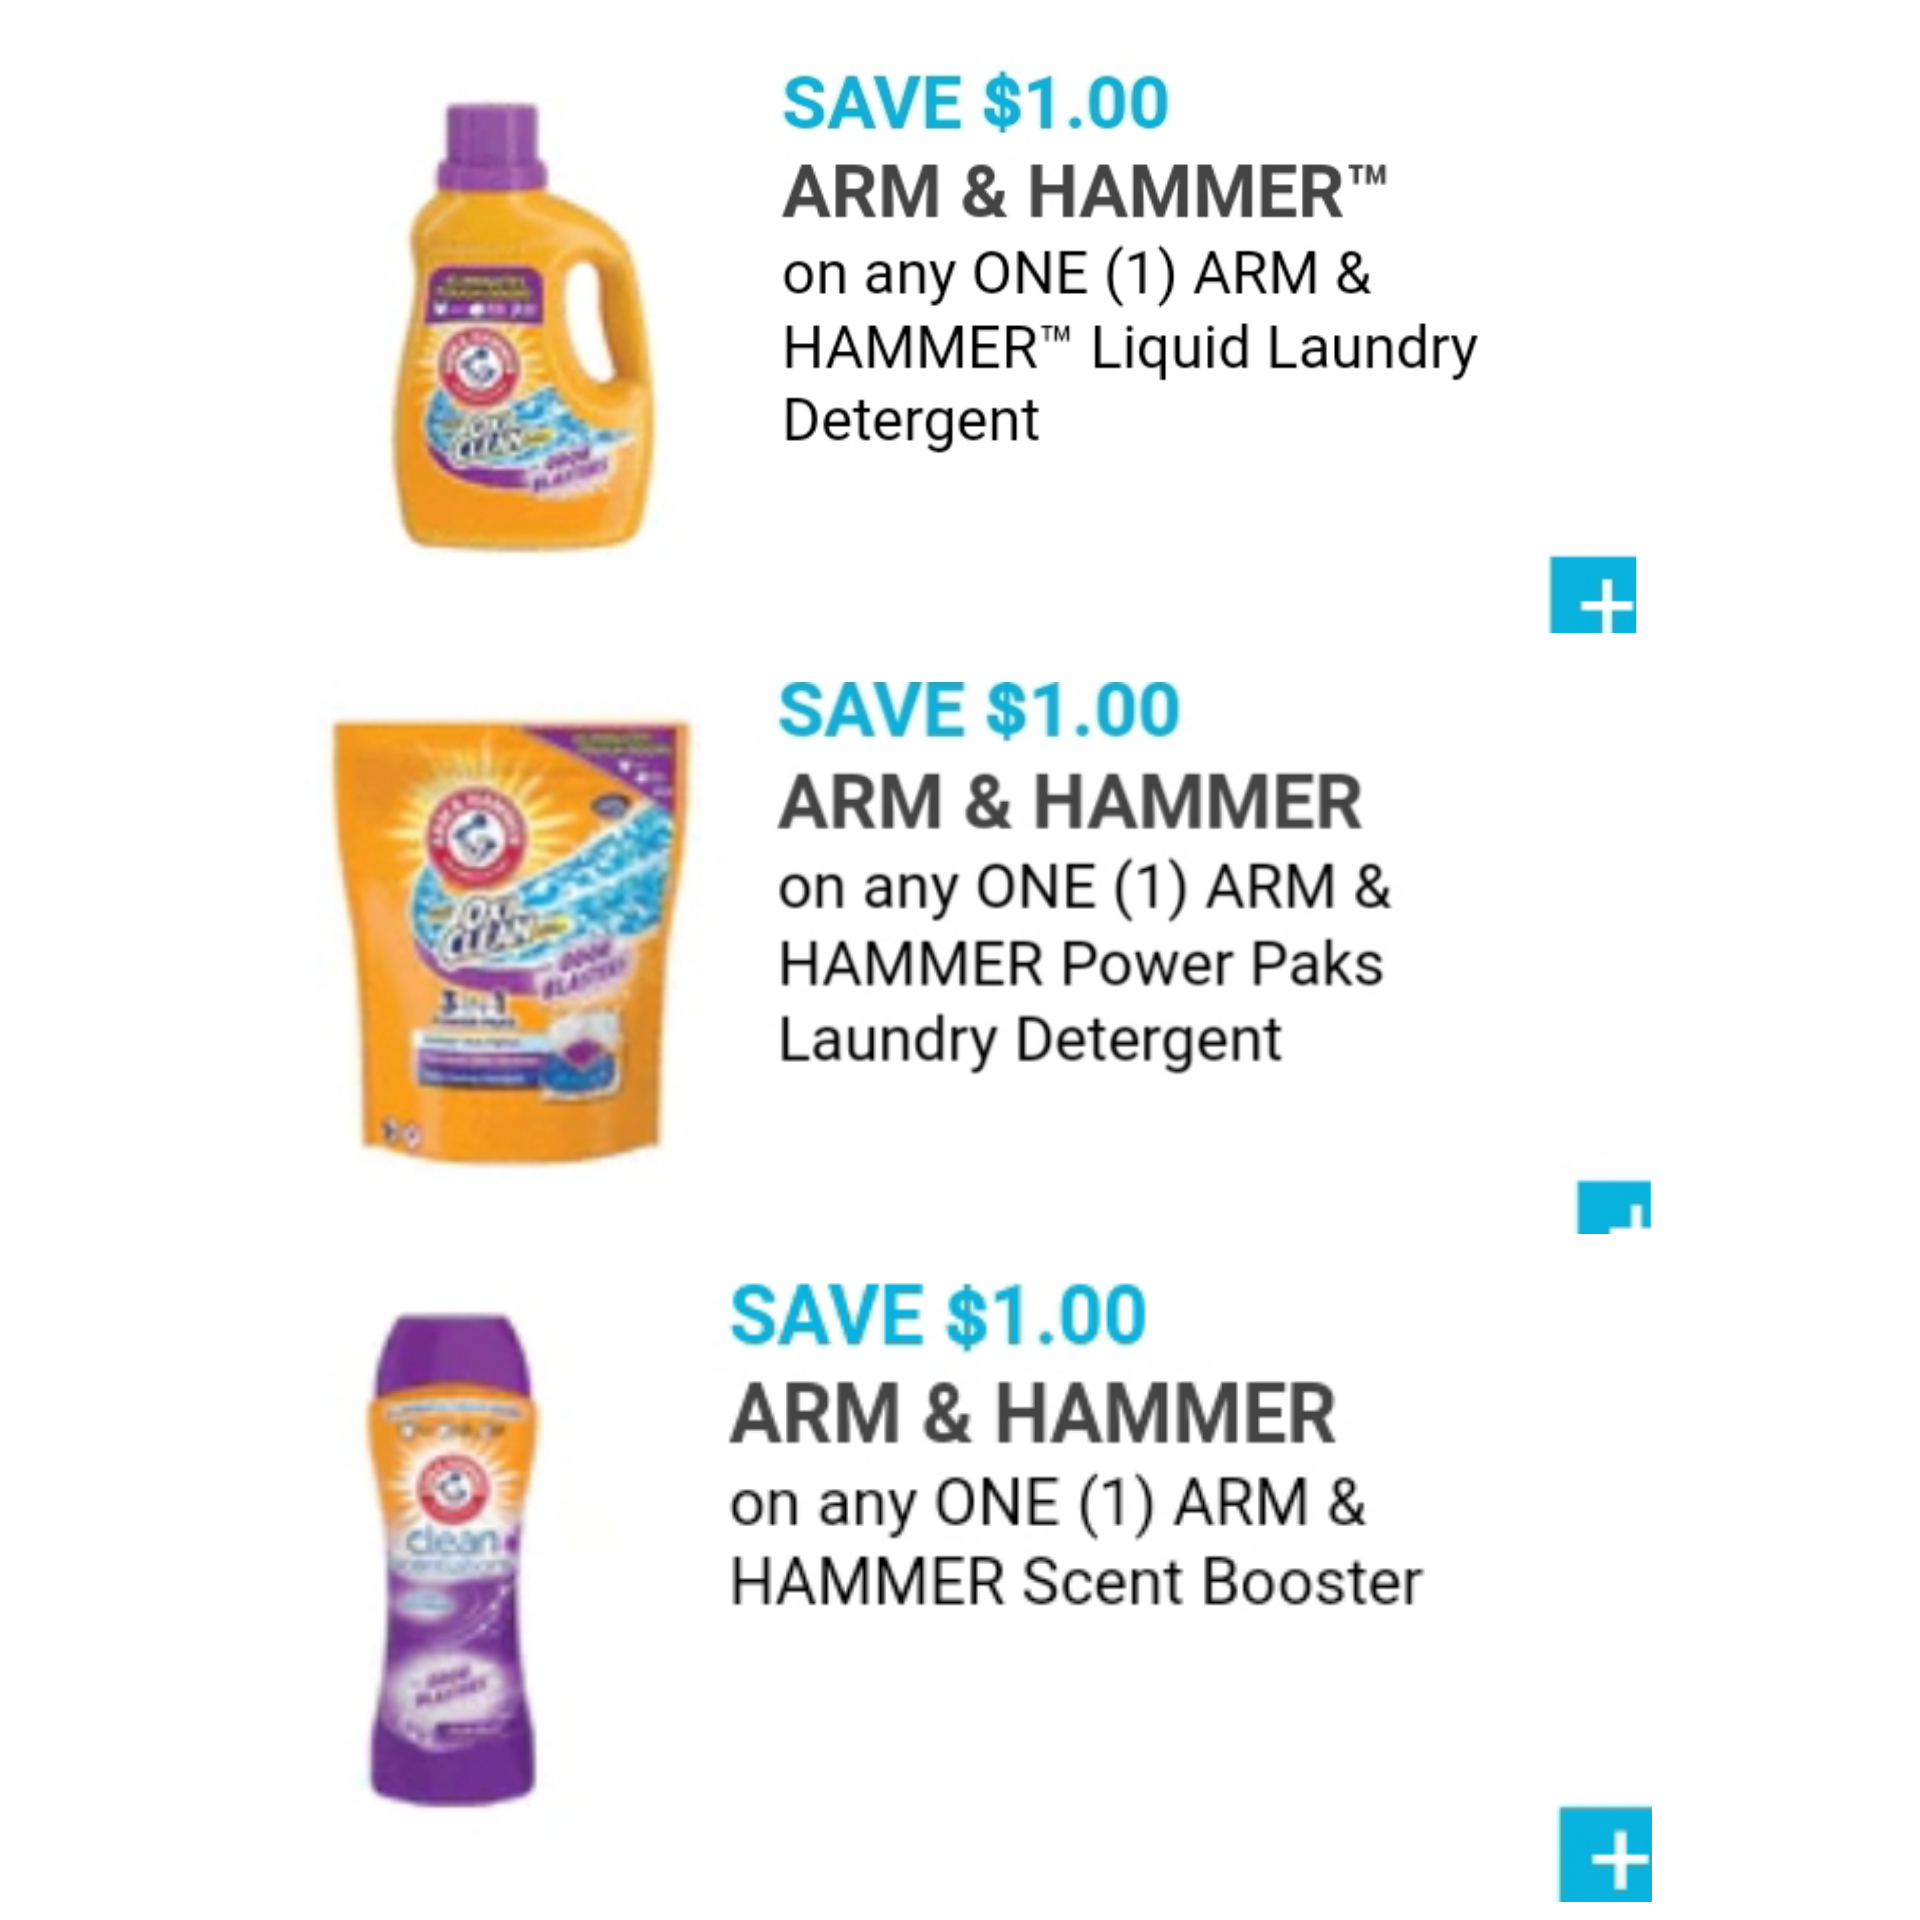 NEW Arm & Hammer Printable Coupons!! How to Shop For Free